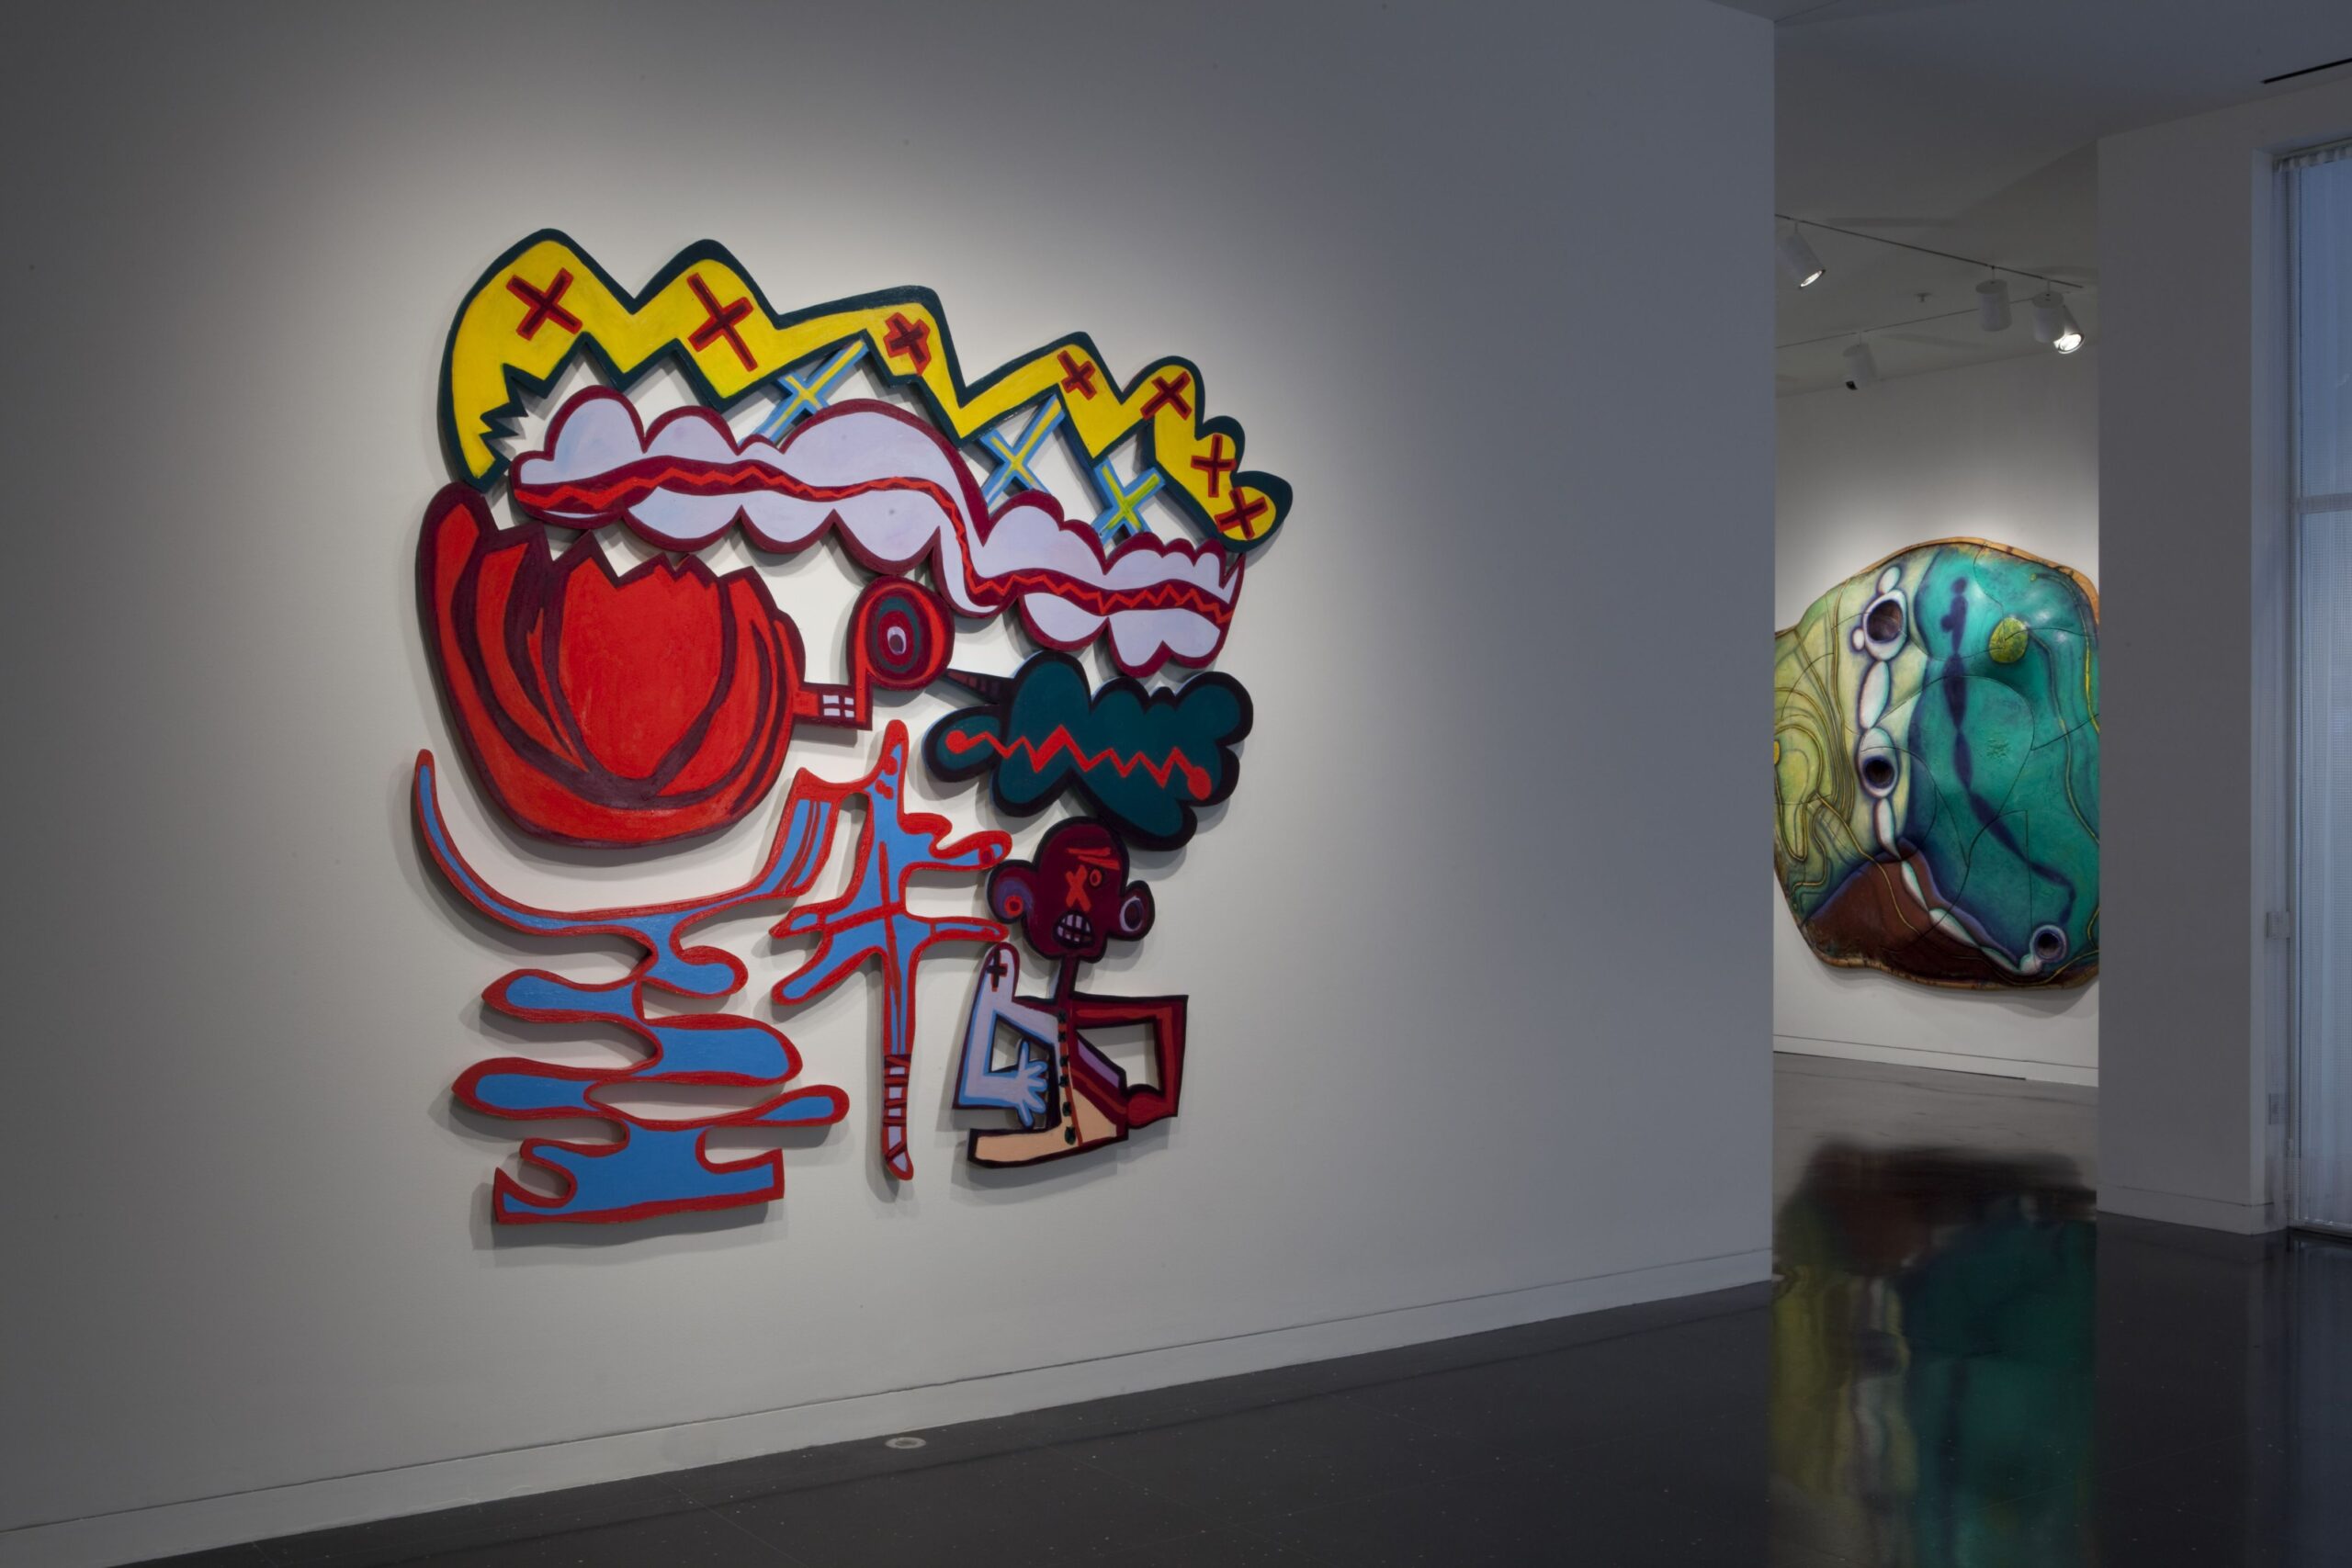 A white gallery space with two large, abstract artworks in colorful prints cut and carved into amorphous shapes. In the closest artwork to the viewer, a stylized humanoid figure is visible.